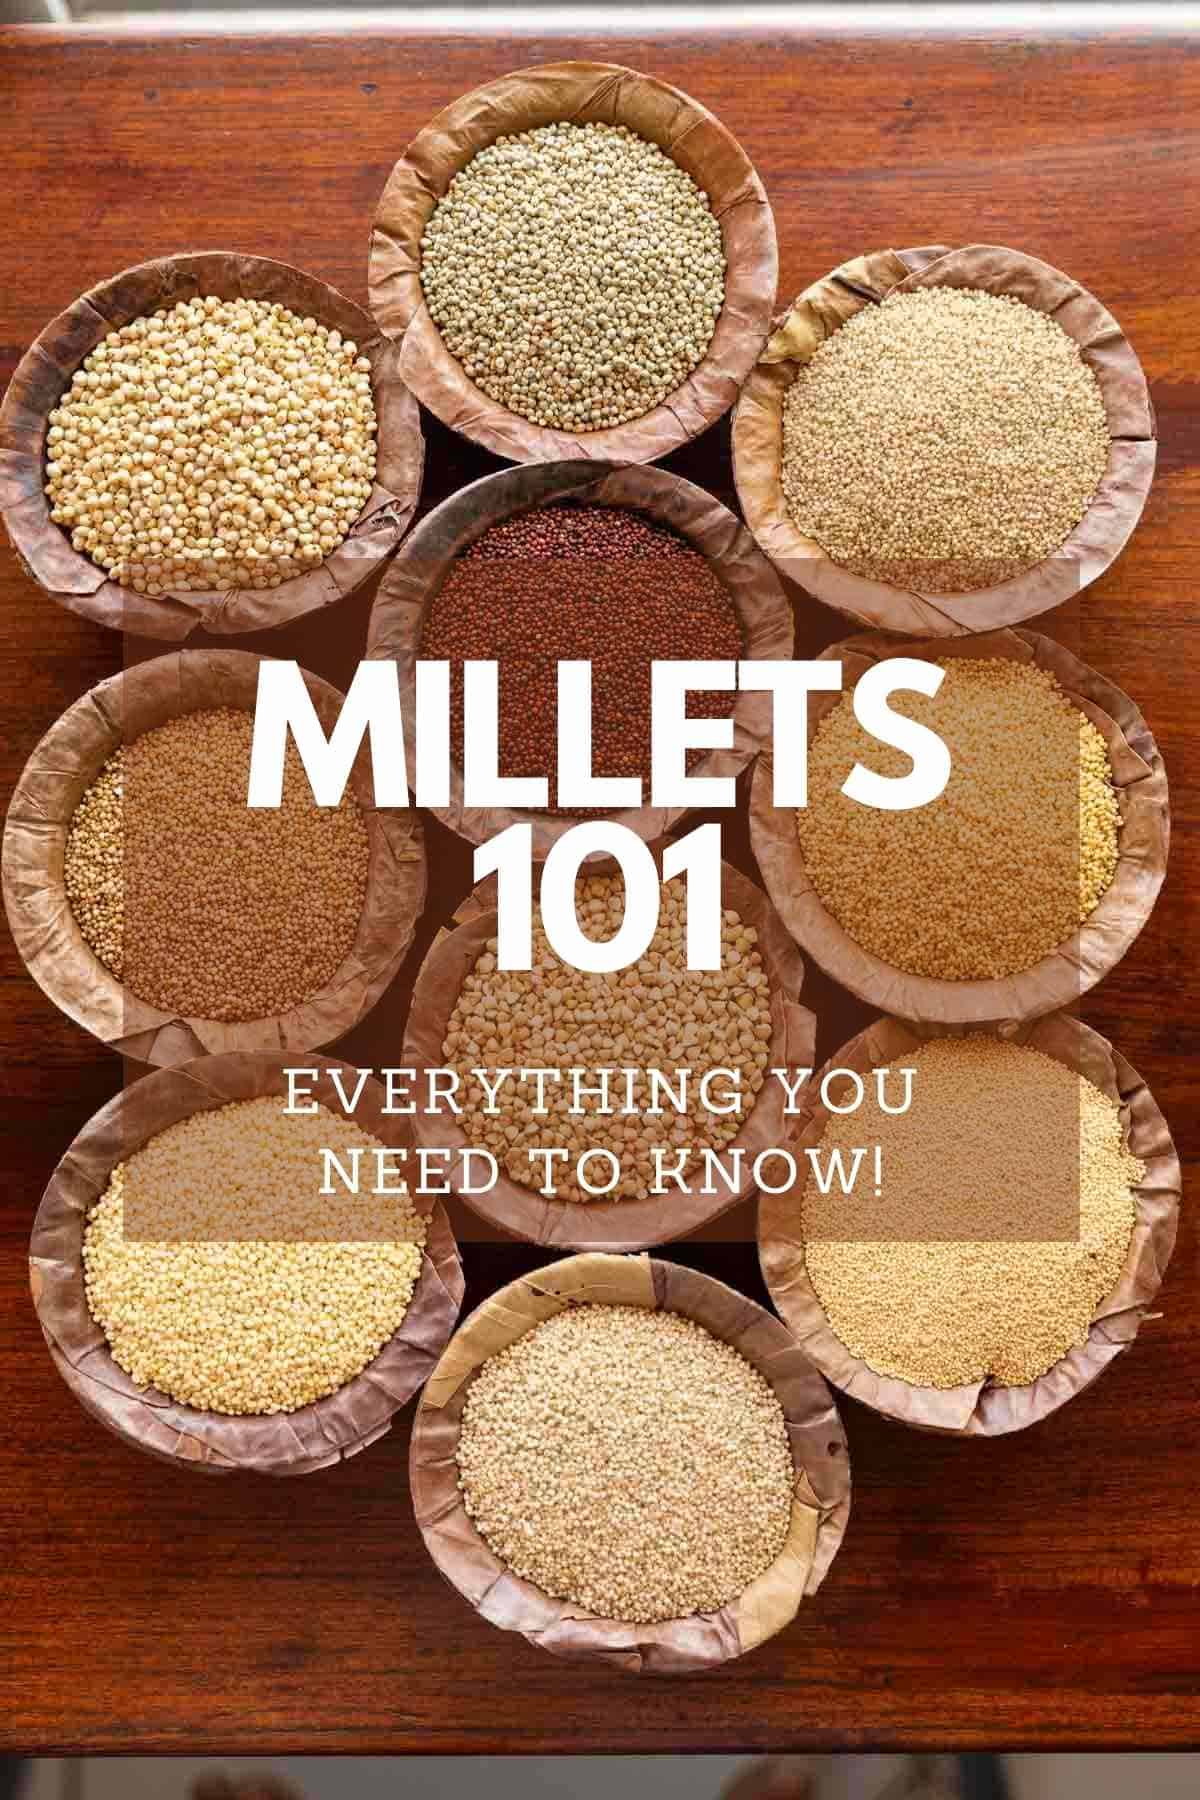 Picture of 10 different millets served in leaf bowls with text overlay - Millets 101